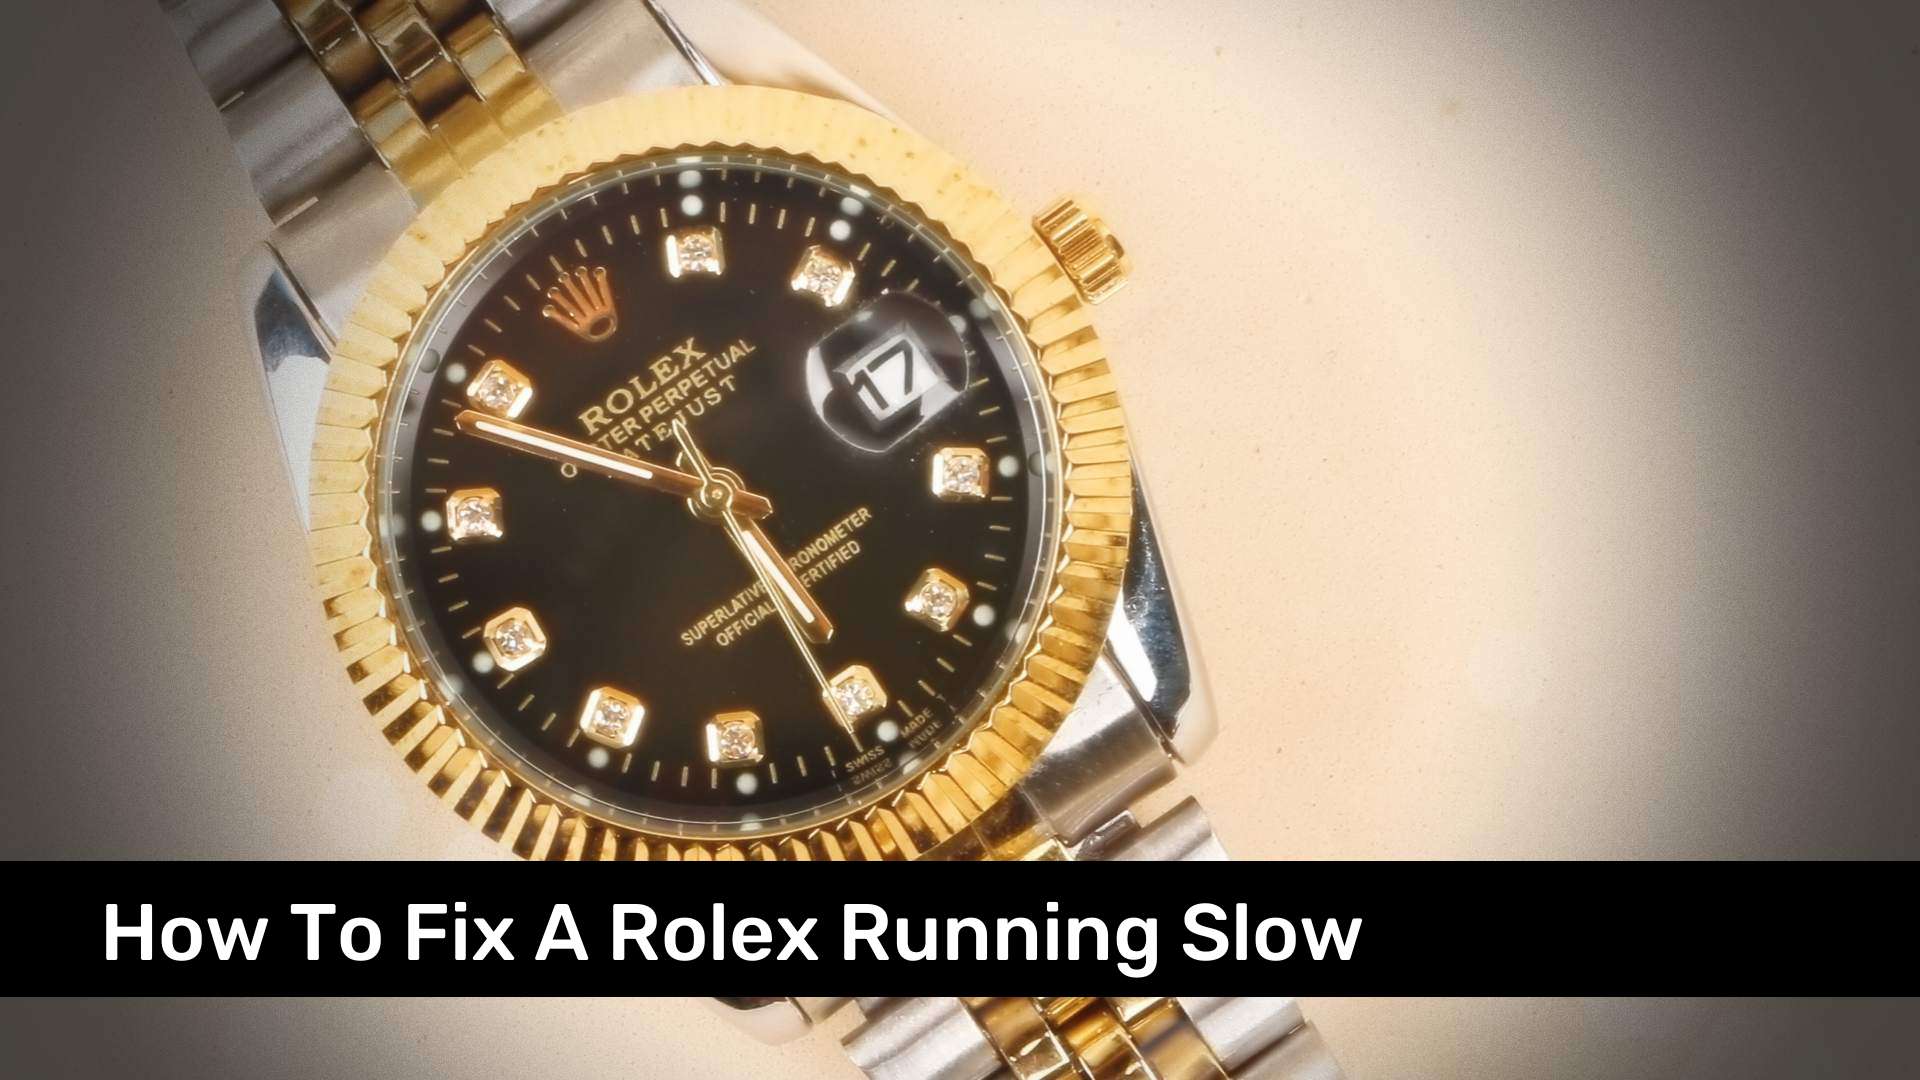 How To Fix A Rolex Running Slow